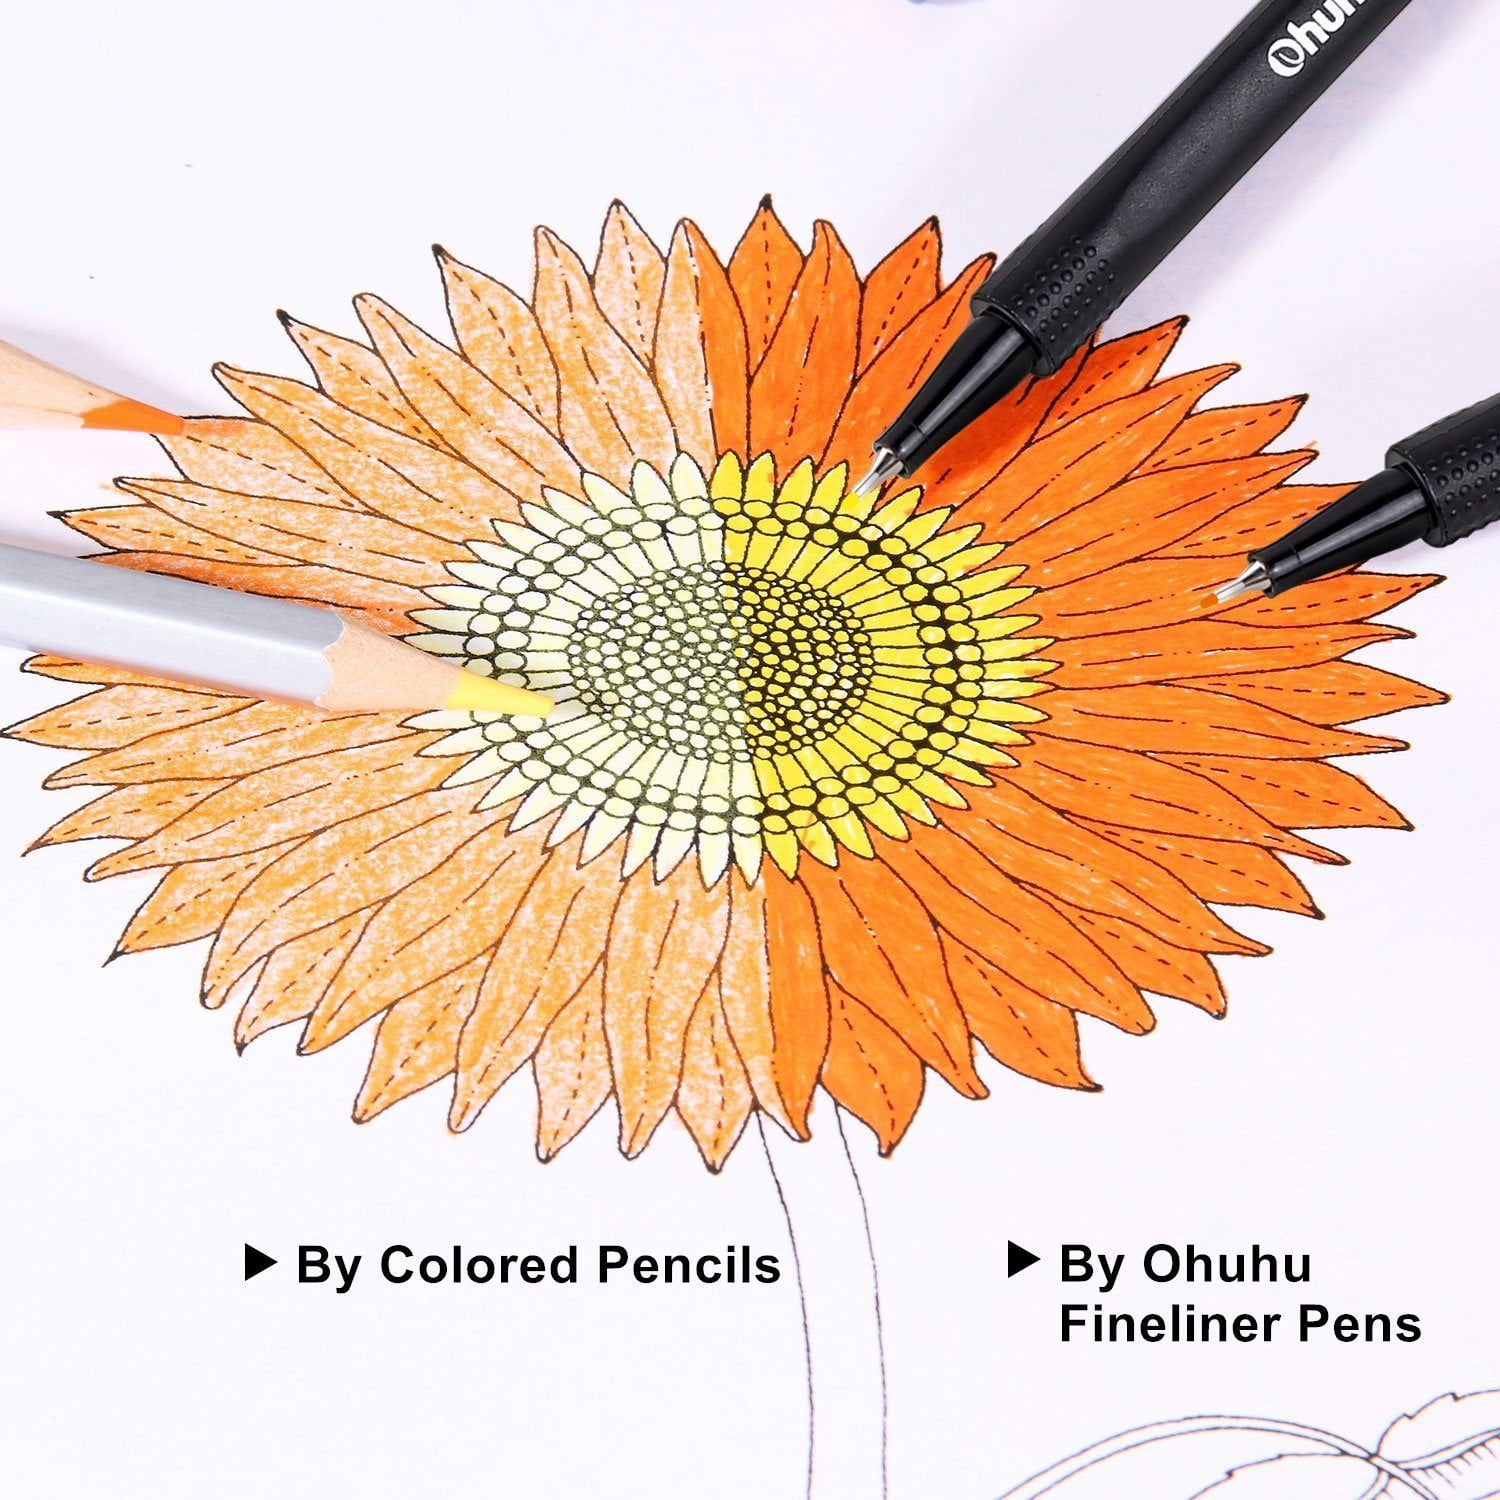 Ohuhu Fineliner Drawing Pens: 8 Sizes Fineliner Pens Pigment Black Ink Micro  Pens Assorted Point Sizes Waterproof for Writing Drawing Journaling  Sketching Anime Manga Watercolor Artists Beginners